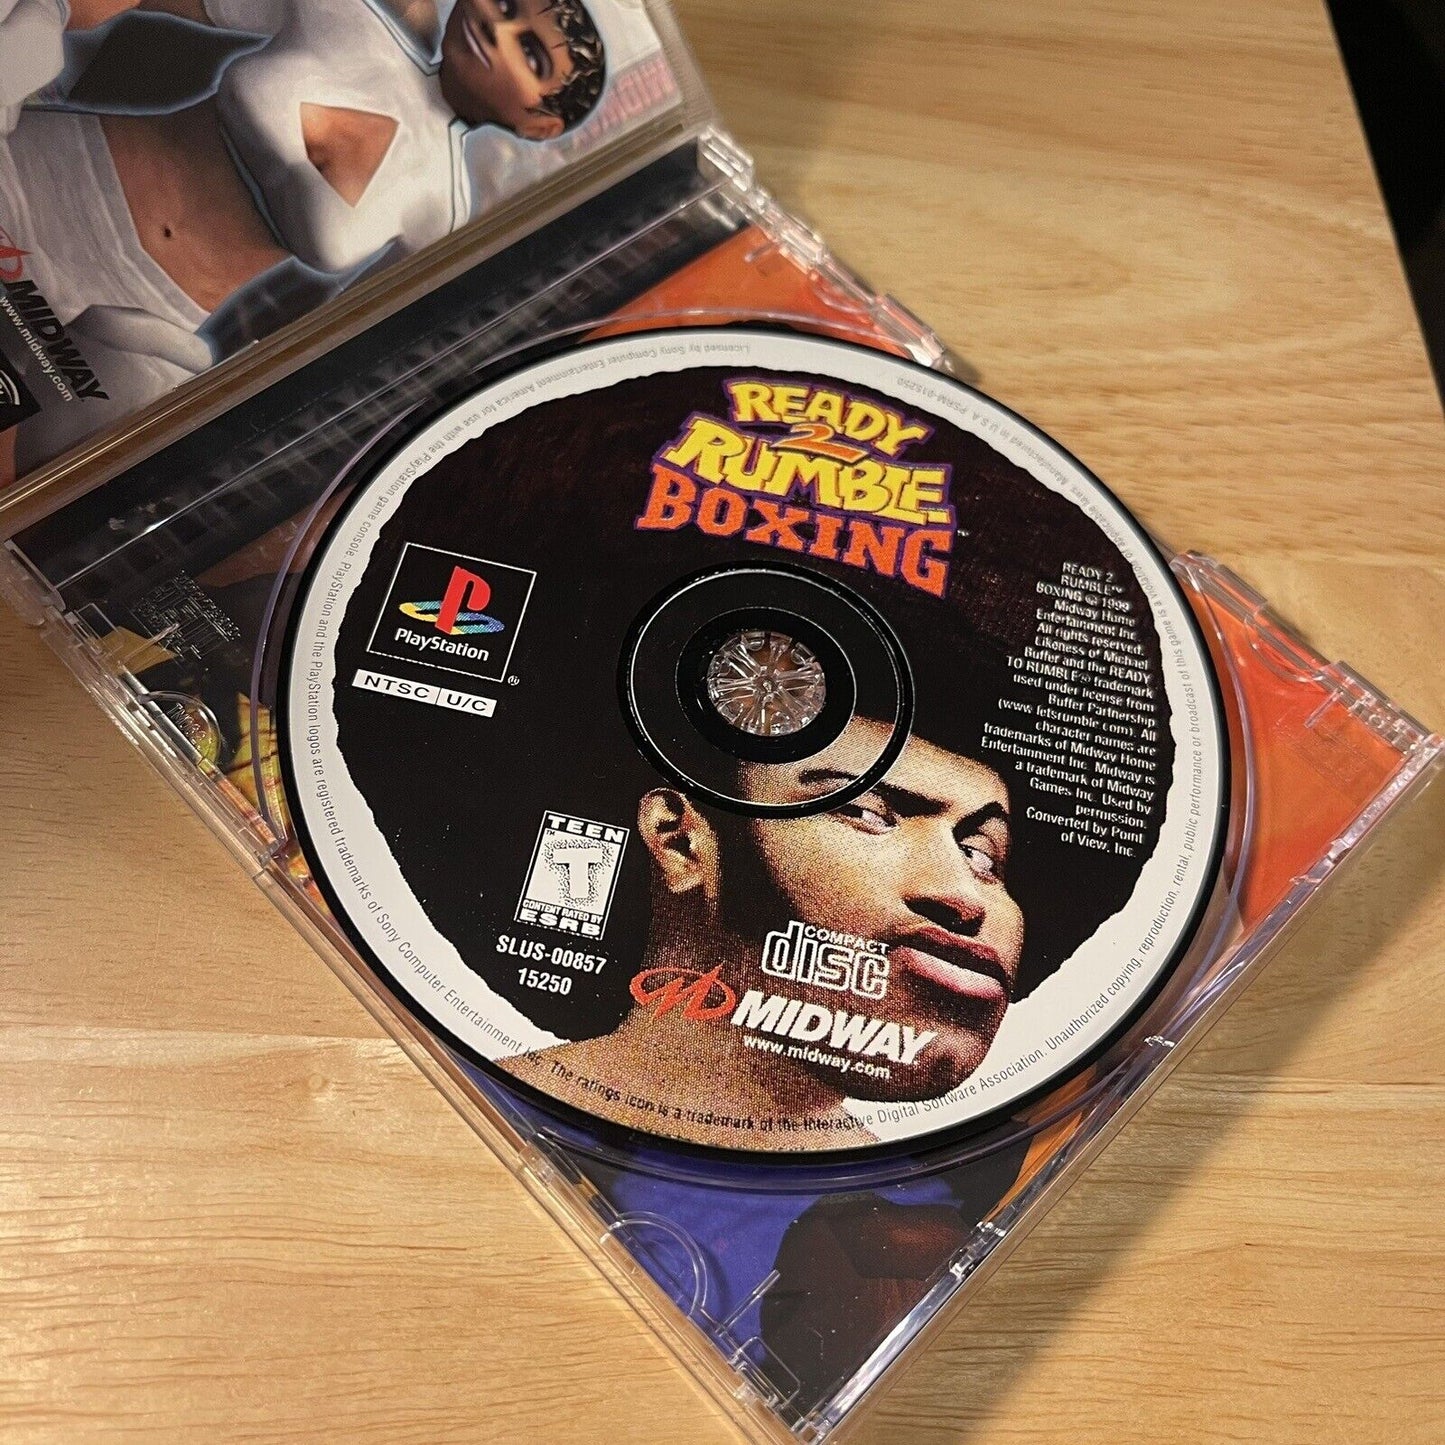 Ready 2 Rumble Boxing Playstation 1 PS1 Complete in Box